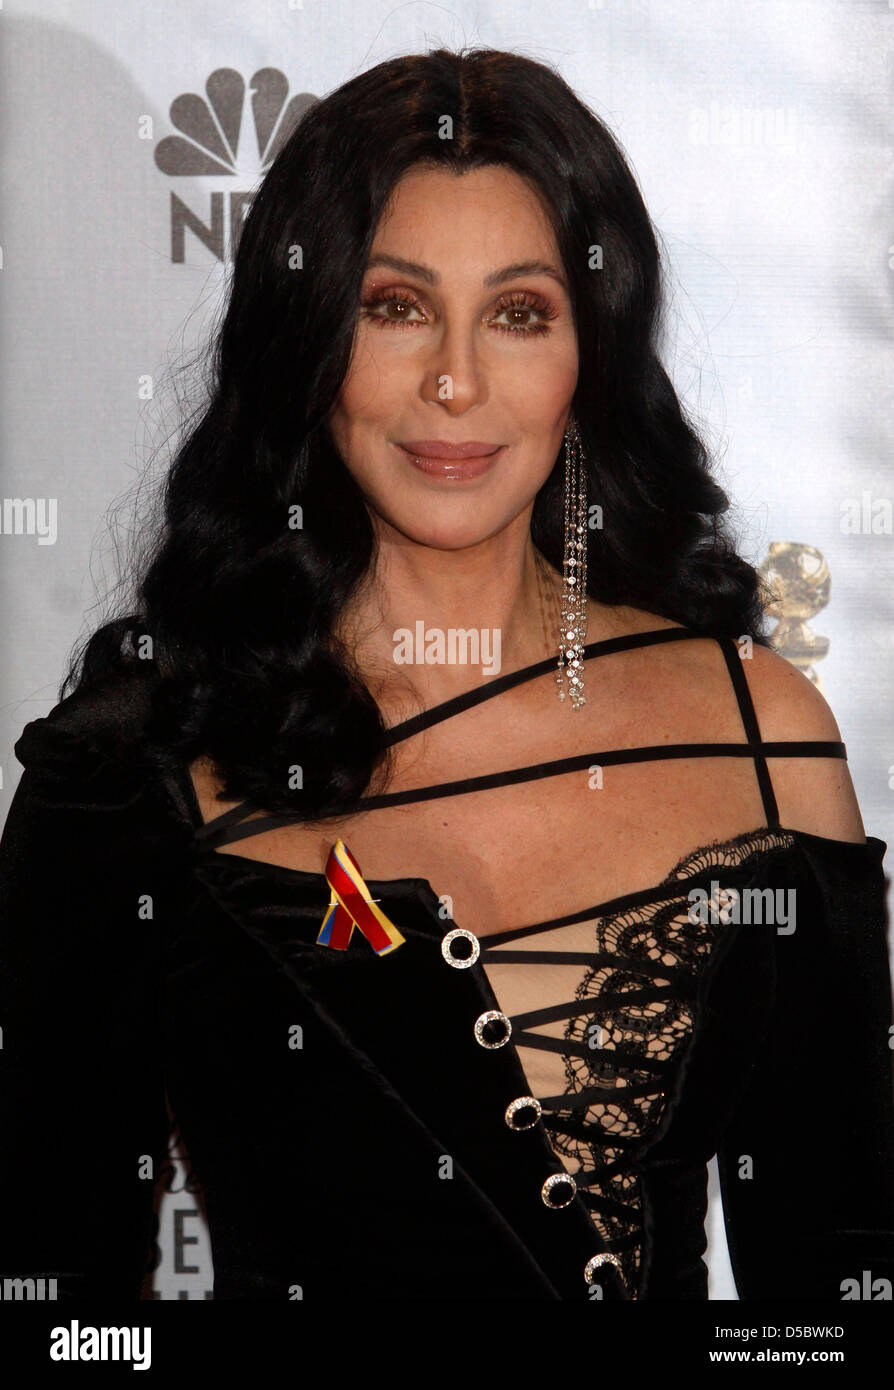 US actress and singer Cher poses in the press room at the 67th Golden Globe Awards in Los Angeles, USA, 17 January 2010. The Golden Globes honour excellence in cinema and television. Photo: Hubert Boesl Stock Photo